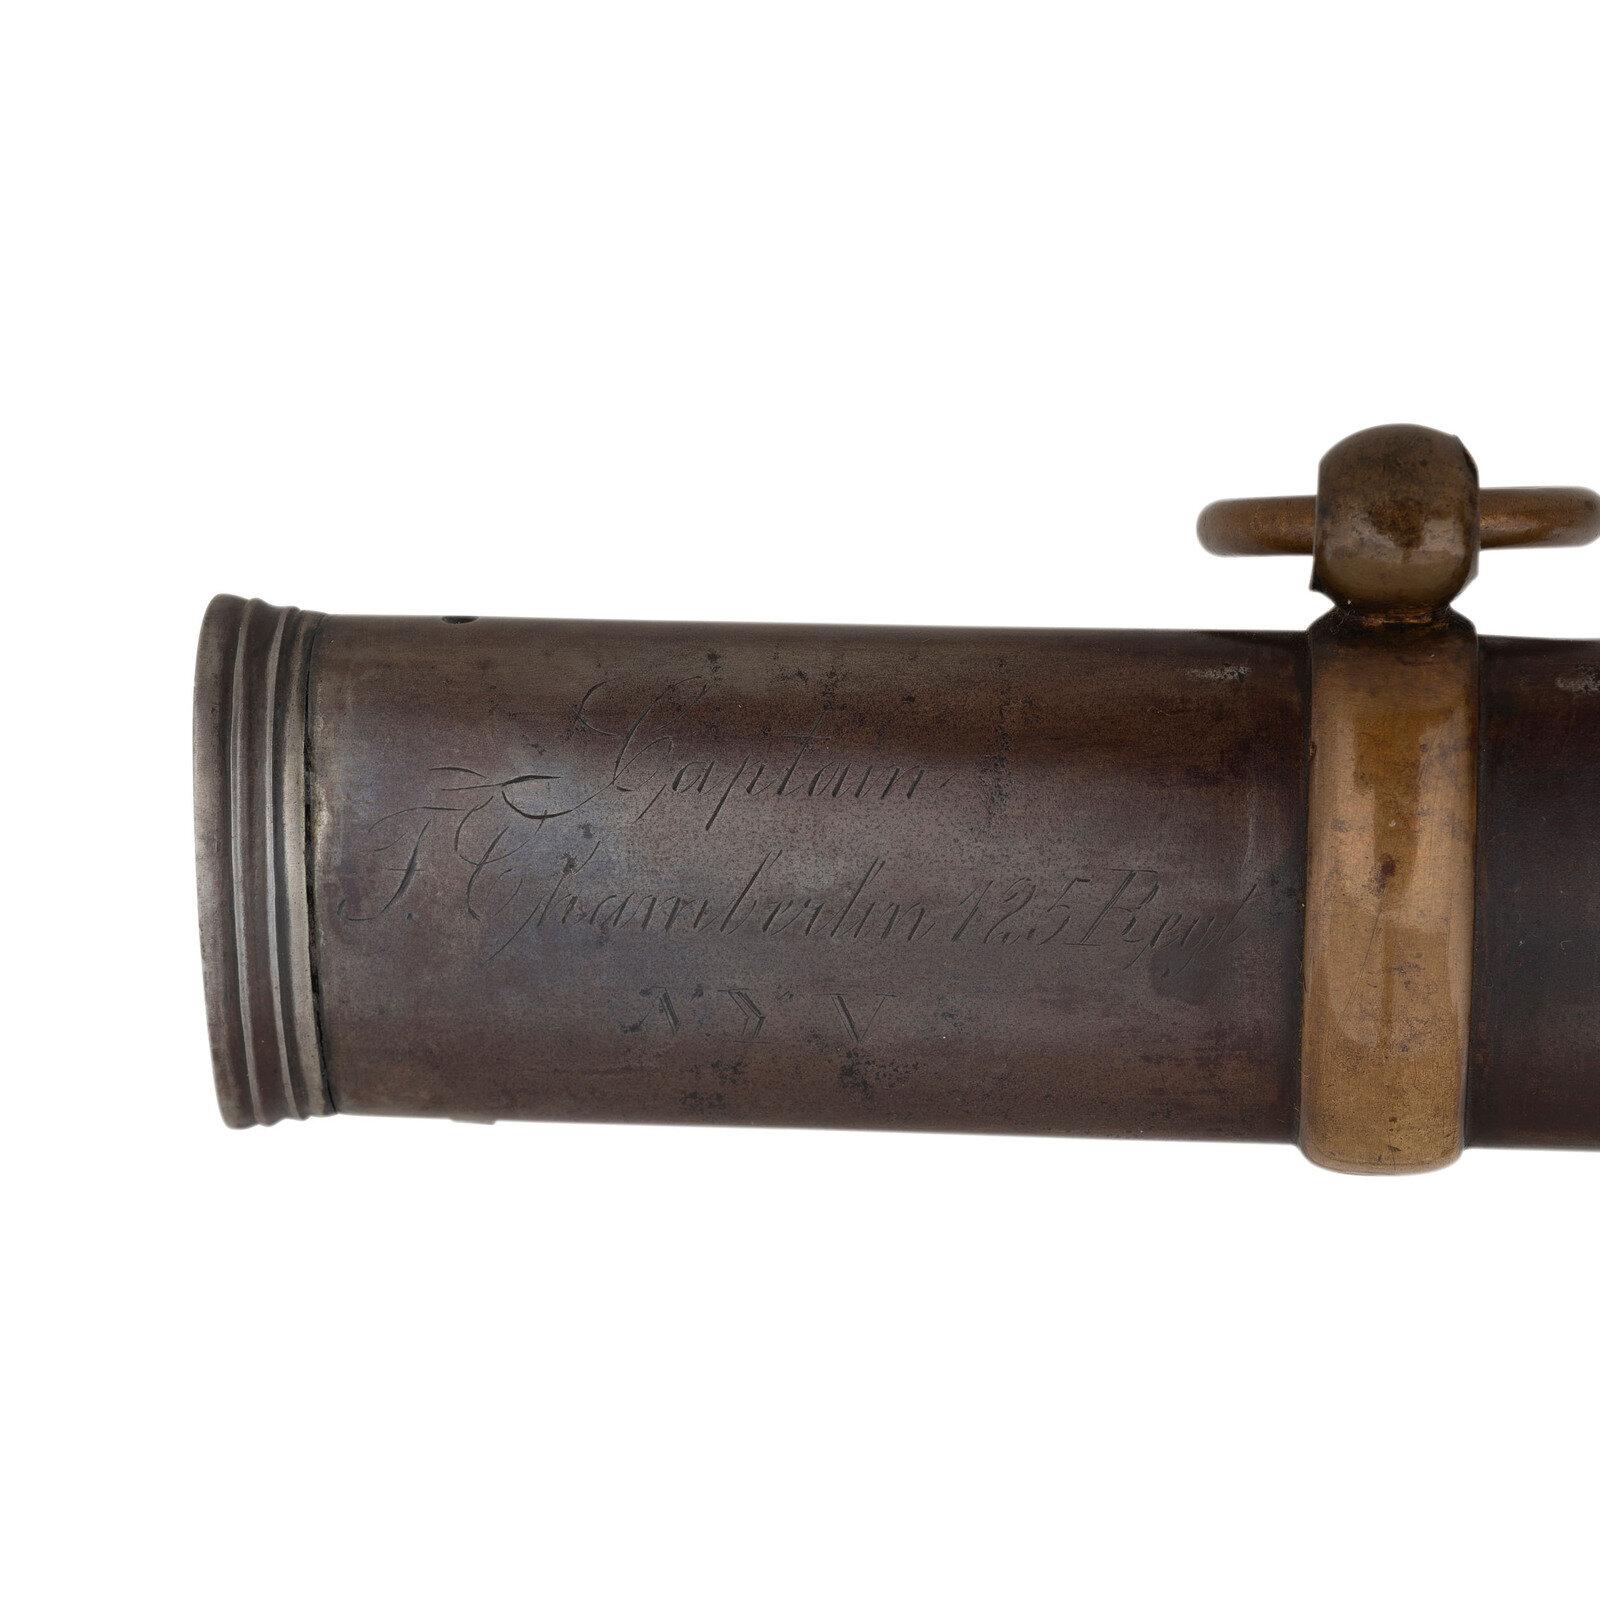 PDL British 1821 Pattern Sword Inscribed to Capt. Frank Chamberlain - WIA at Gettysburg